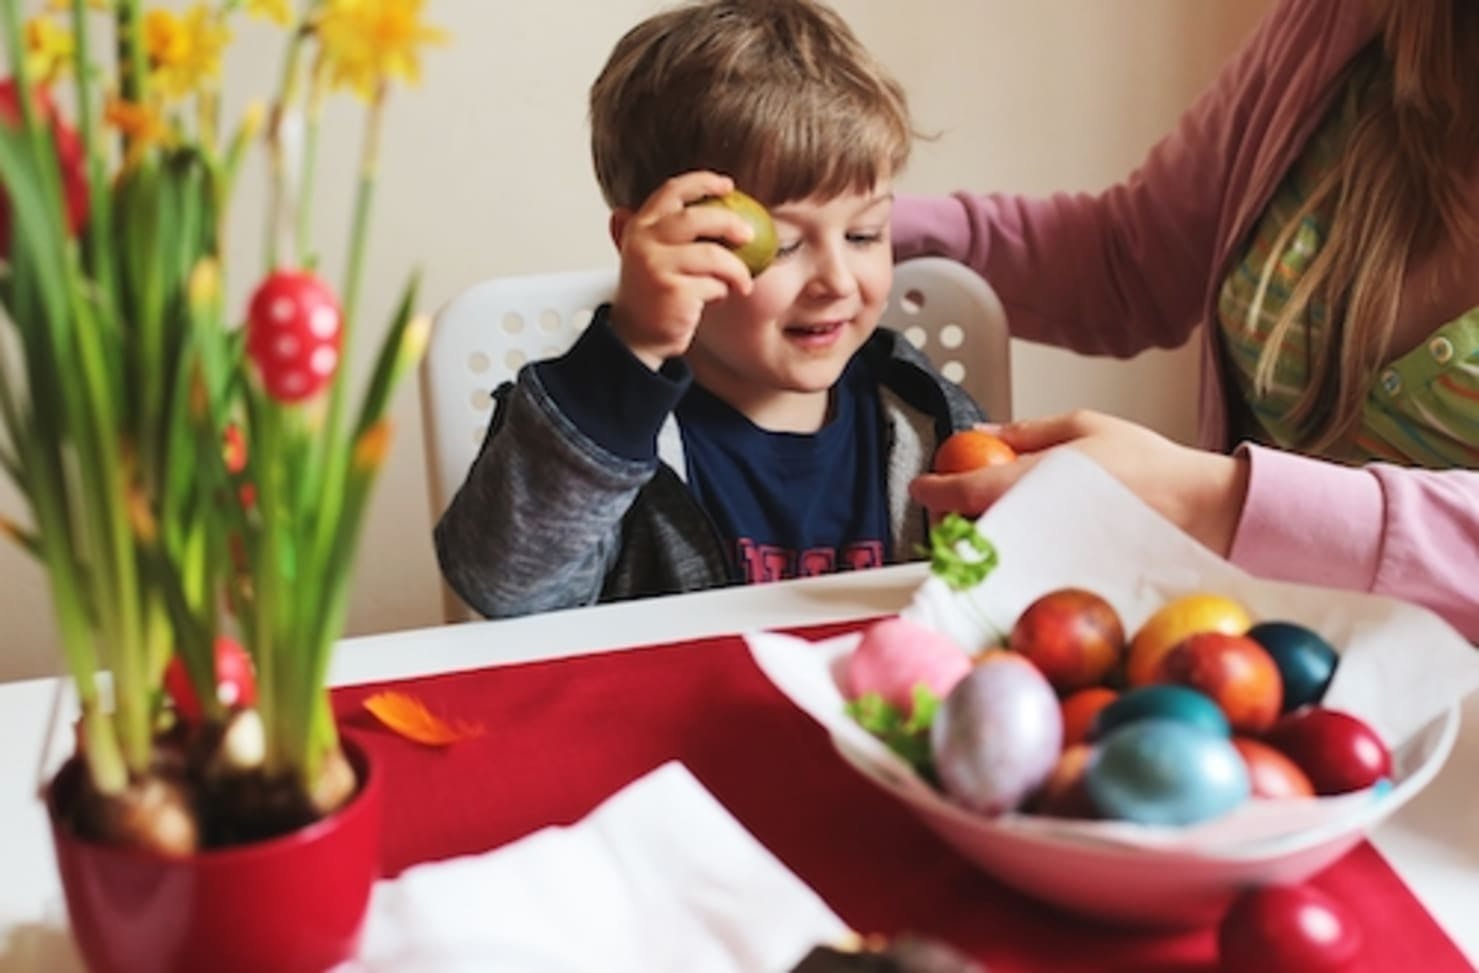 A boy holding an Easter egg at a table.